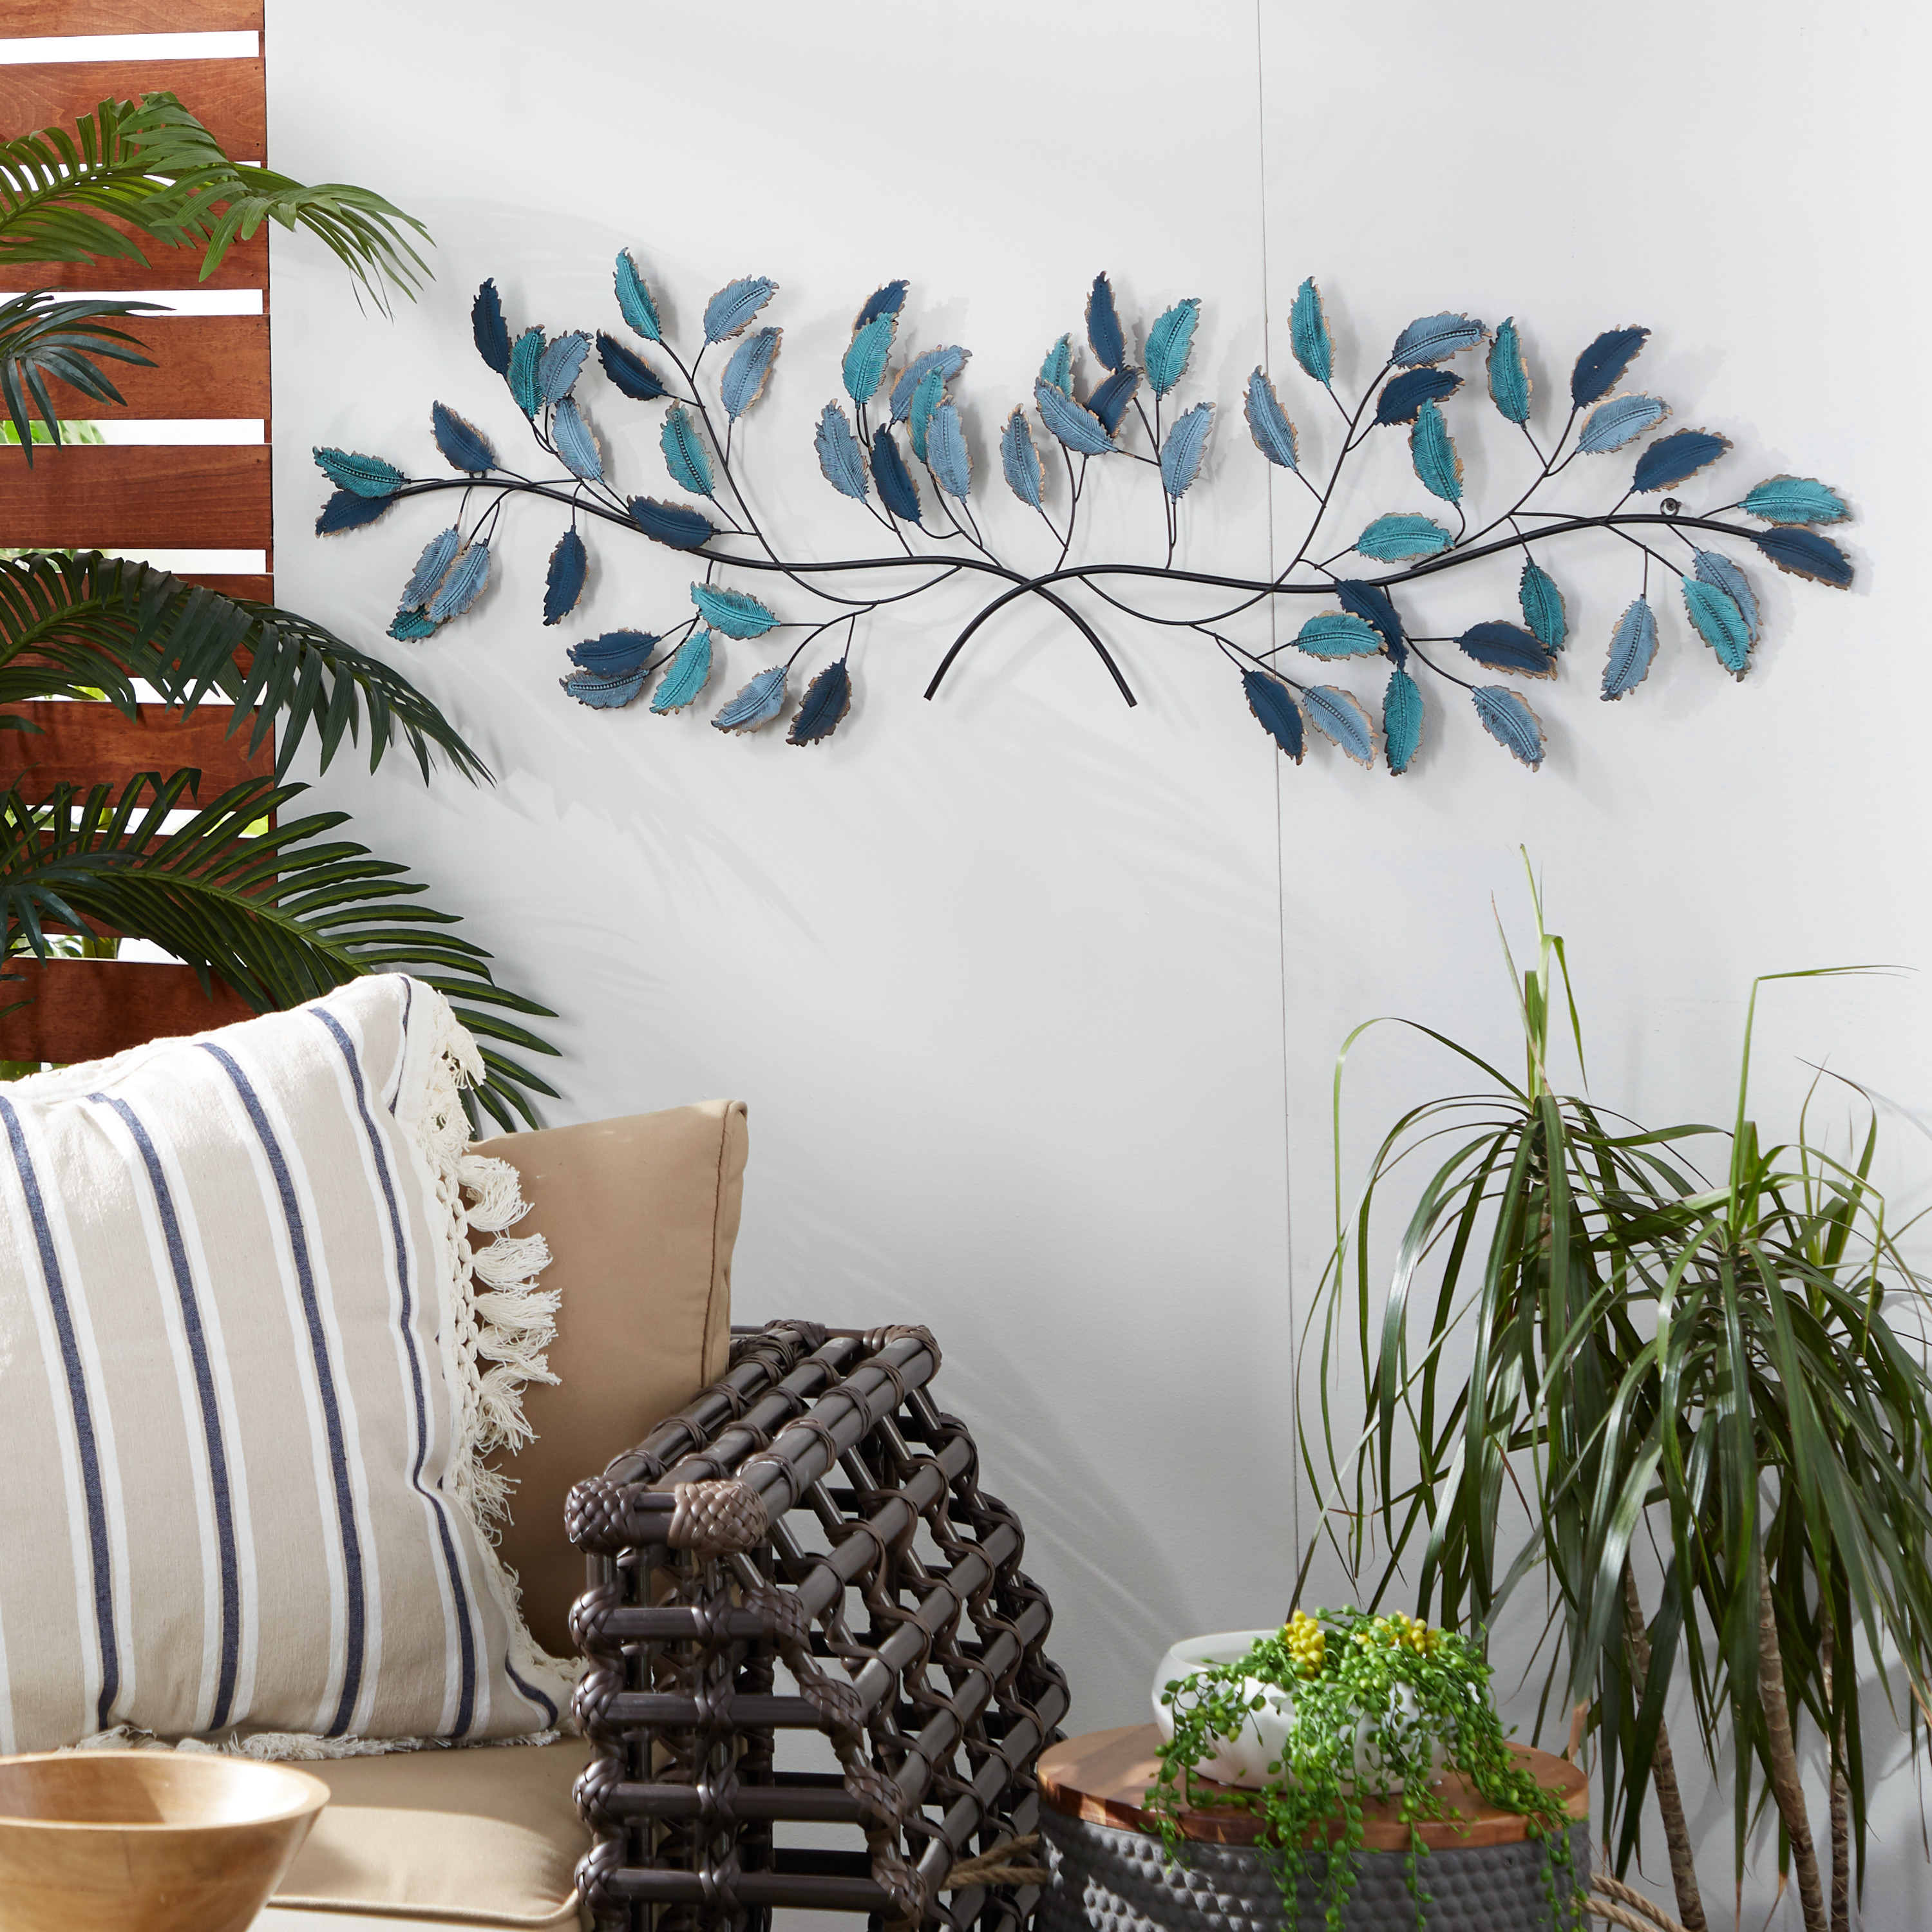 DecMode Blue Metal Leaf Wall Decor with Gold Accents